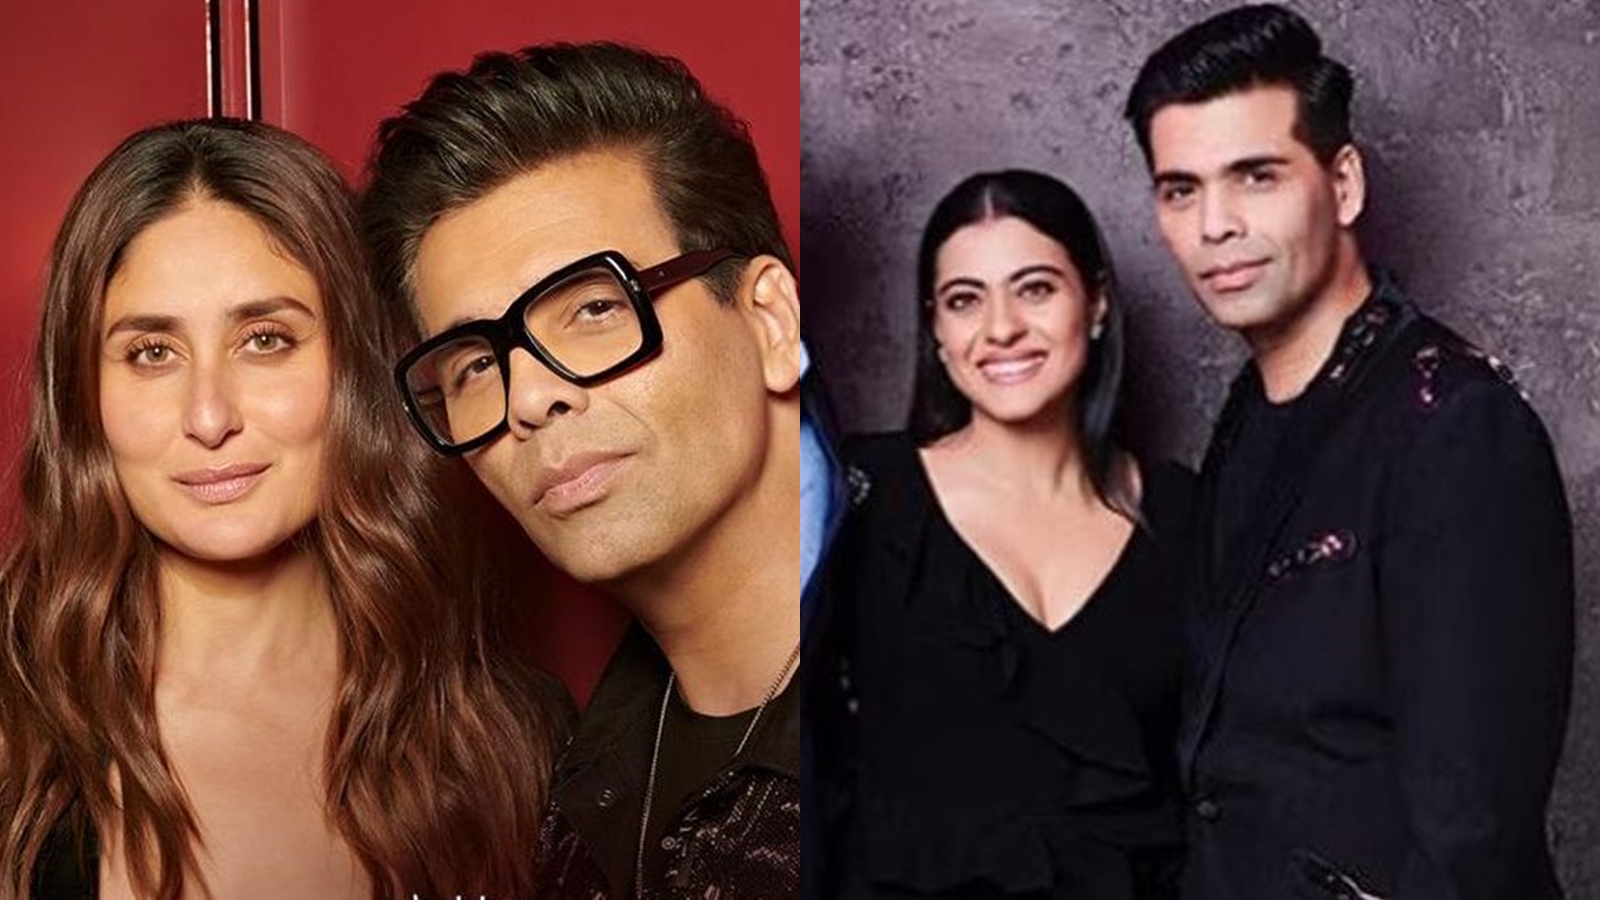 Kajol Fist Time Sex - Karan Johar recalls time when he stopped speaking to Kareena Kapoor, how he  ended fued with Kajol: 'After my dad was diagnosed with cancerâ€¦' |  Bollywood News - The Indian Express